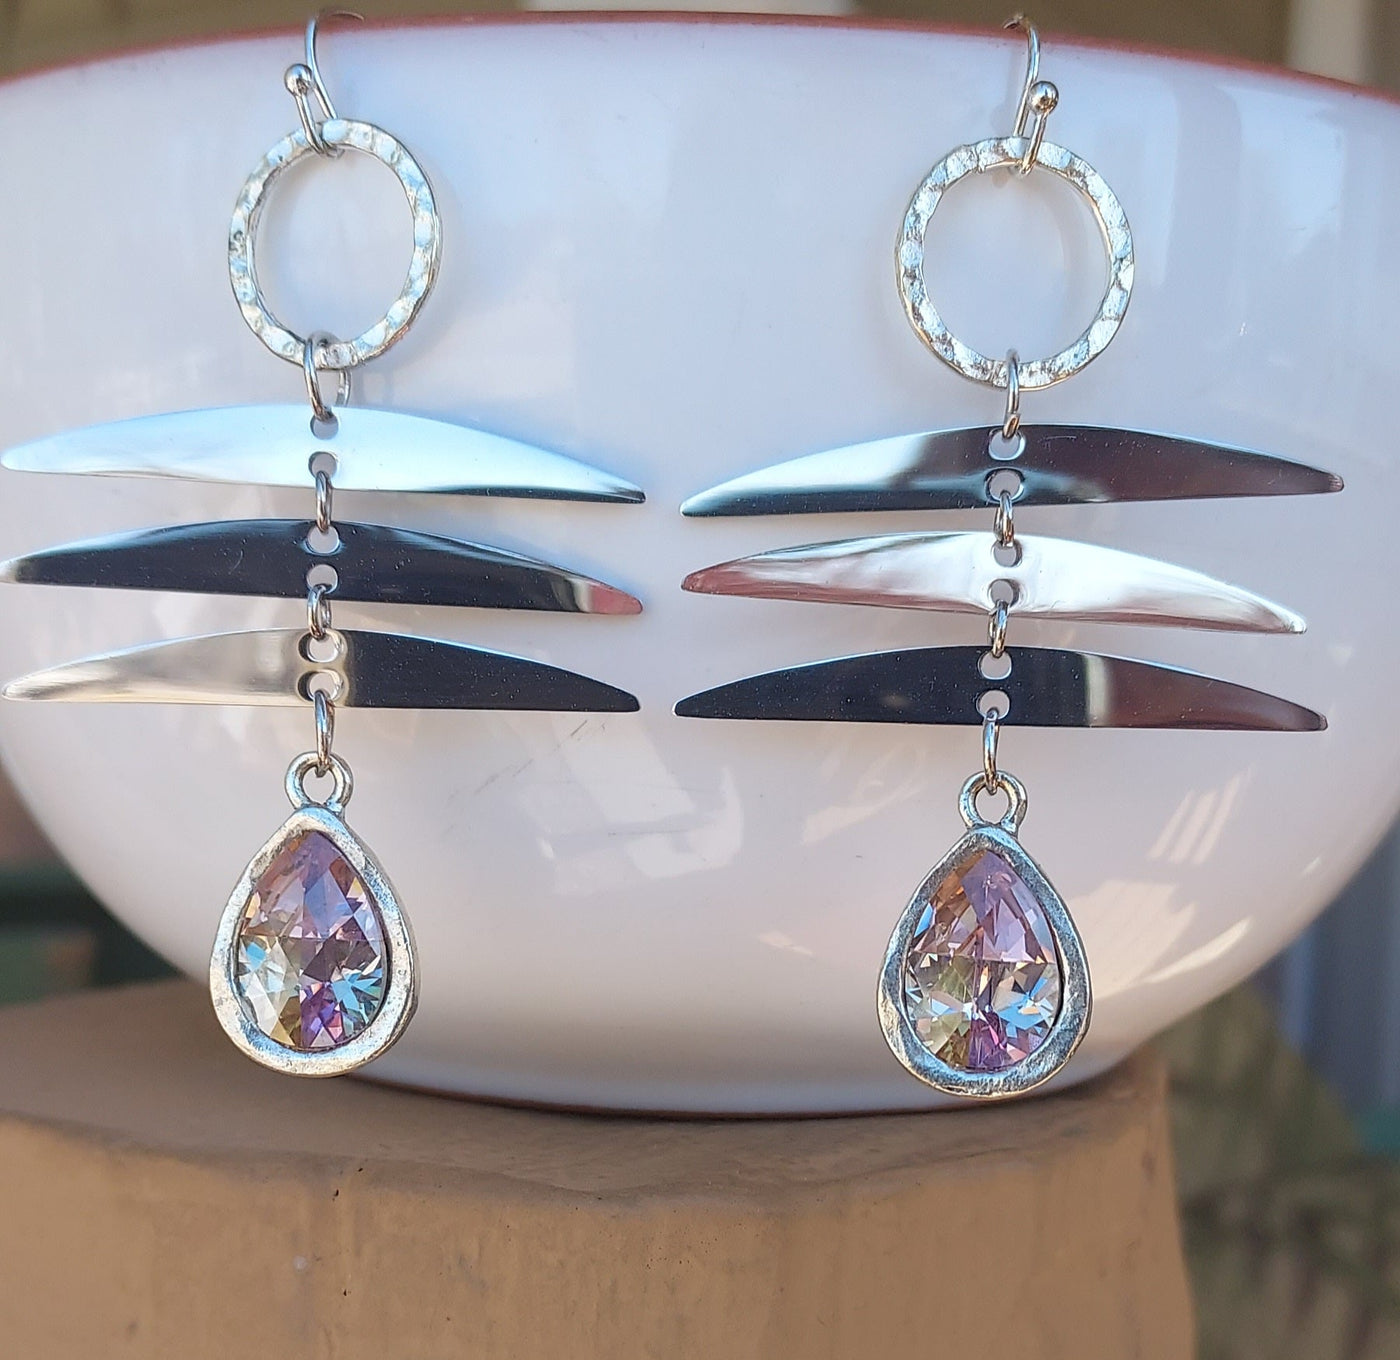 "Stone of Focus and Clarity" Cubic Zirconia & Silver Statement Earrings- Artisan Made